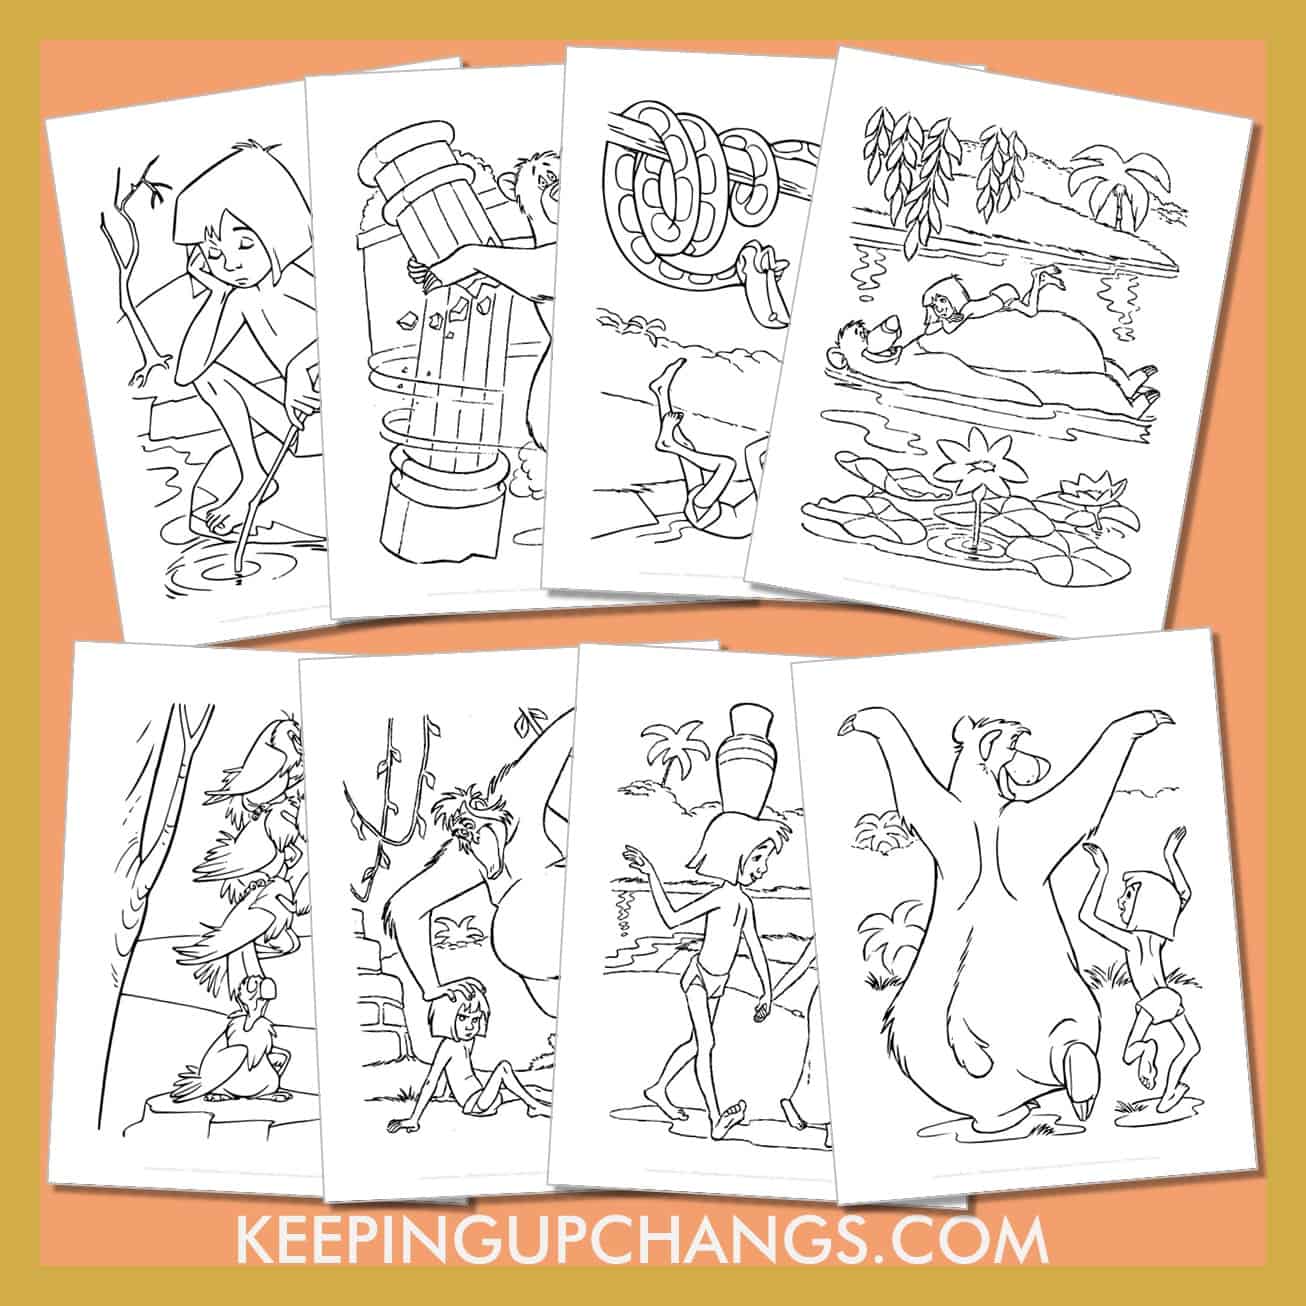 free jungle book pictures to color for toddlers, kids, adults.